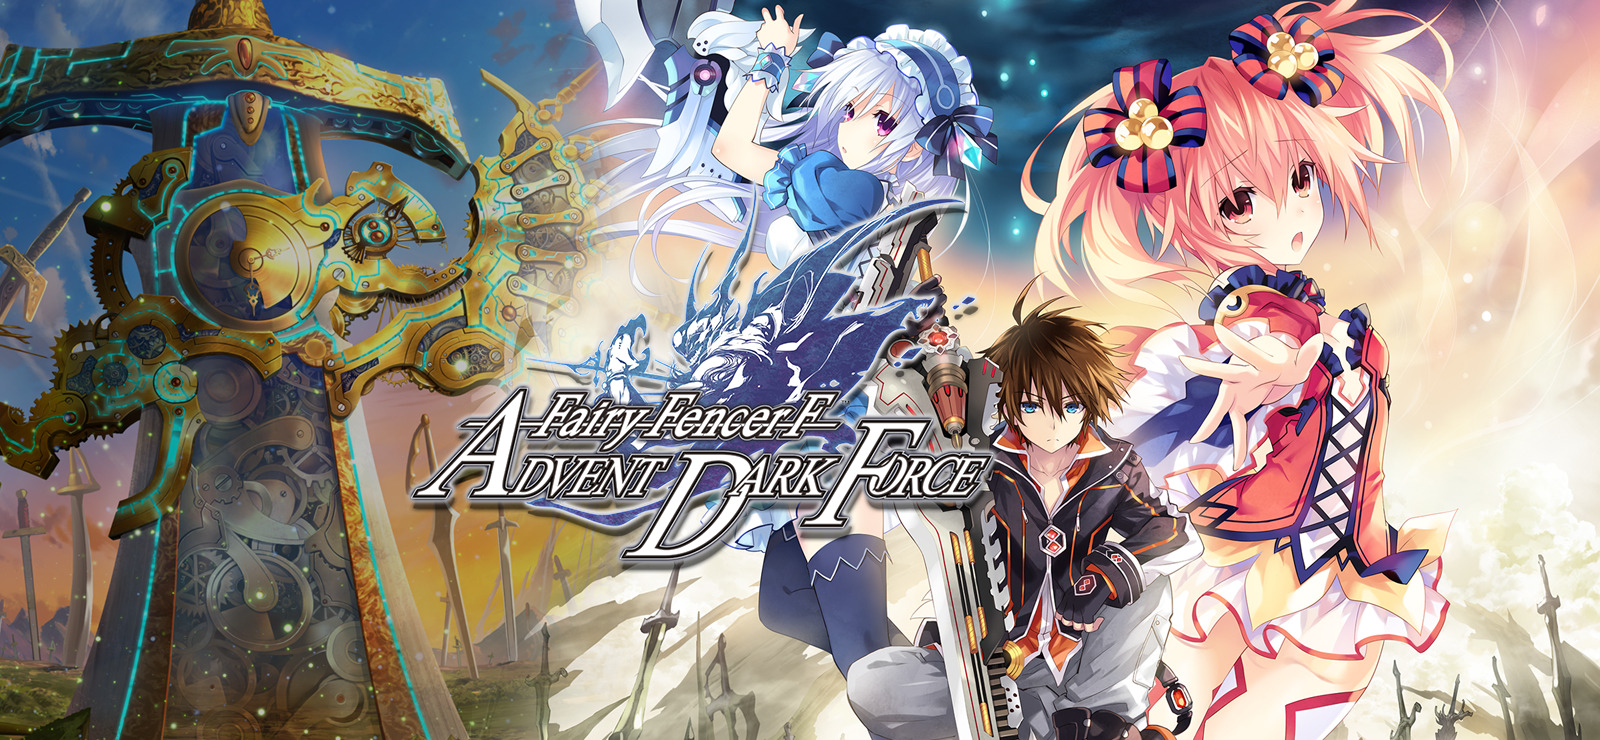 Pin on Fairy Fenecer F:Advent Dark Force